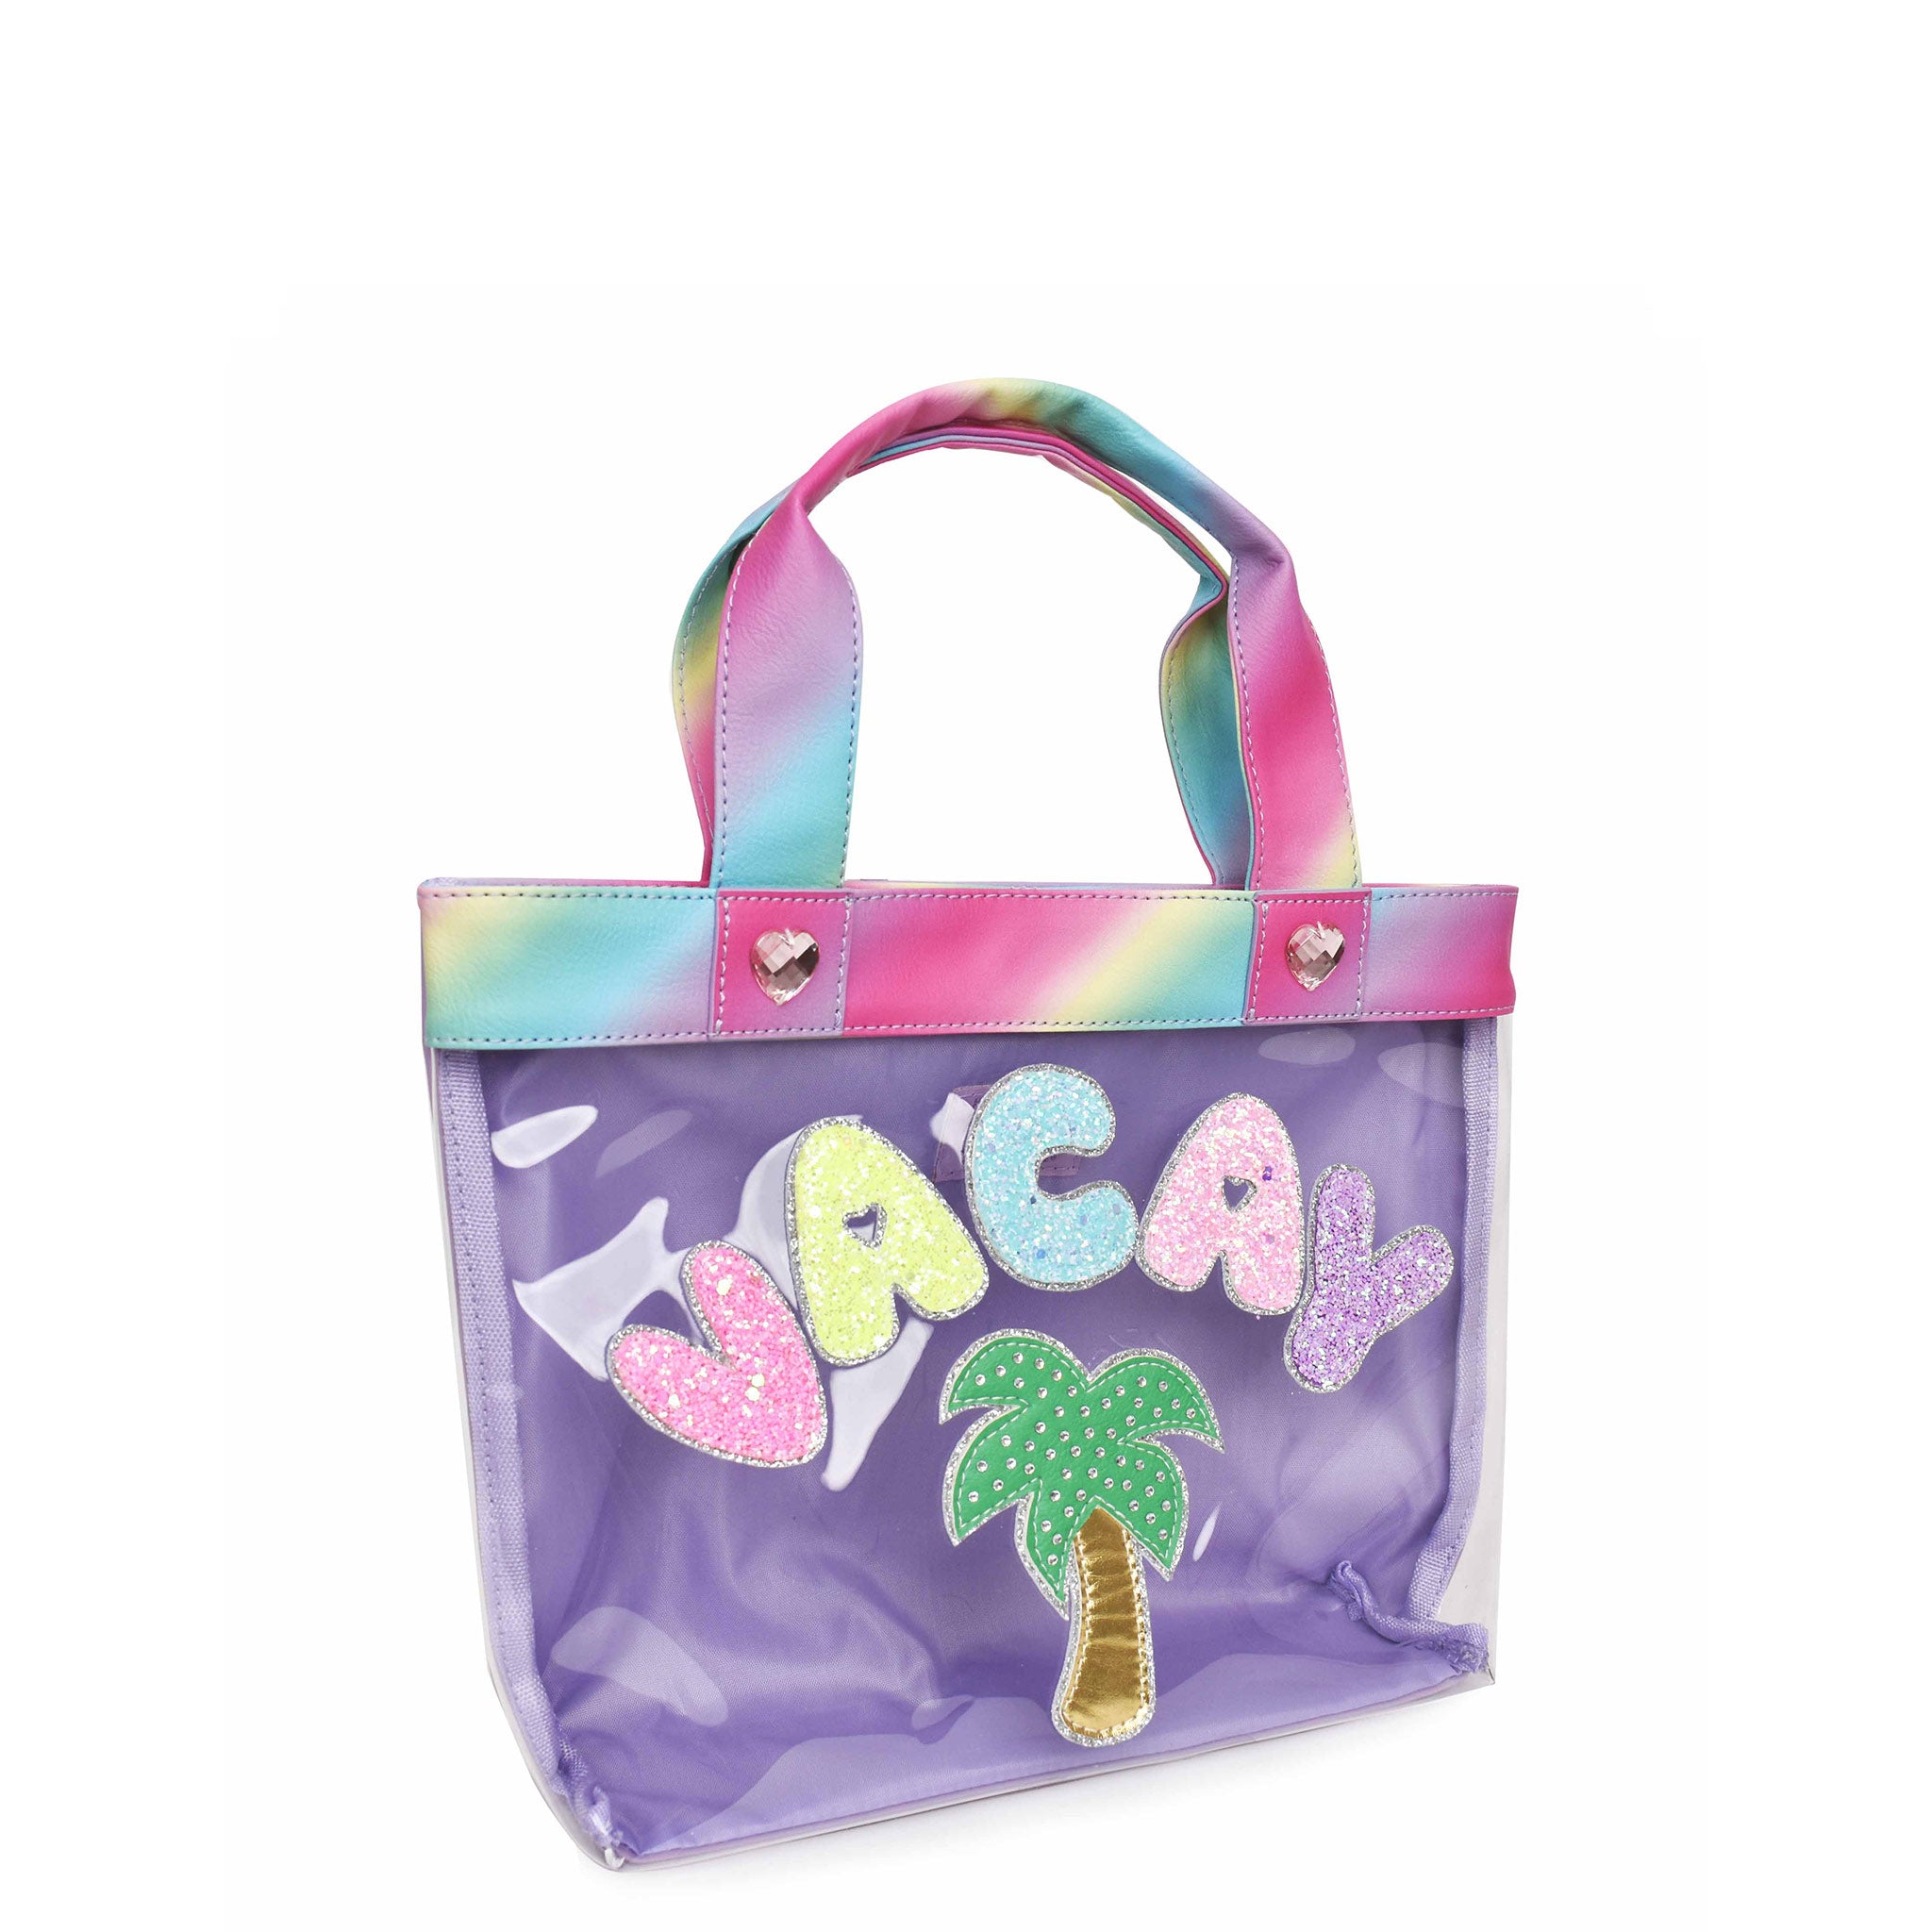 Side view of clear tote bag embellished with glitter bubble letters 'VACAY' and palm tree appliqués